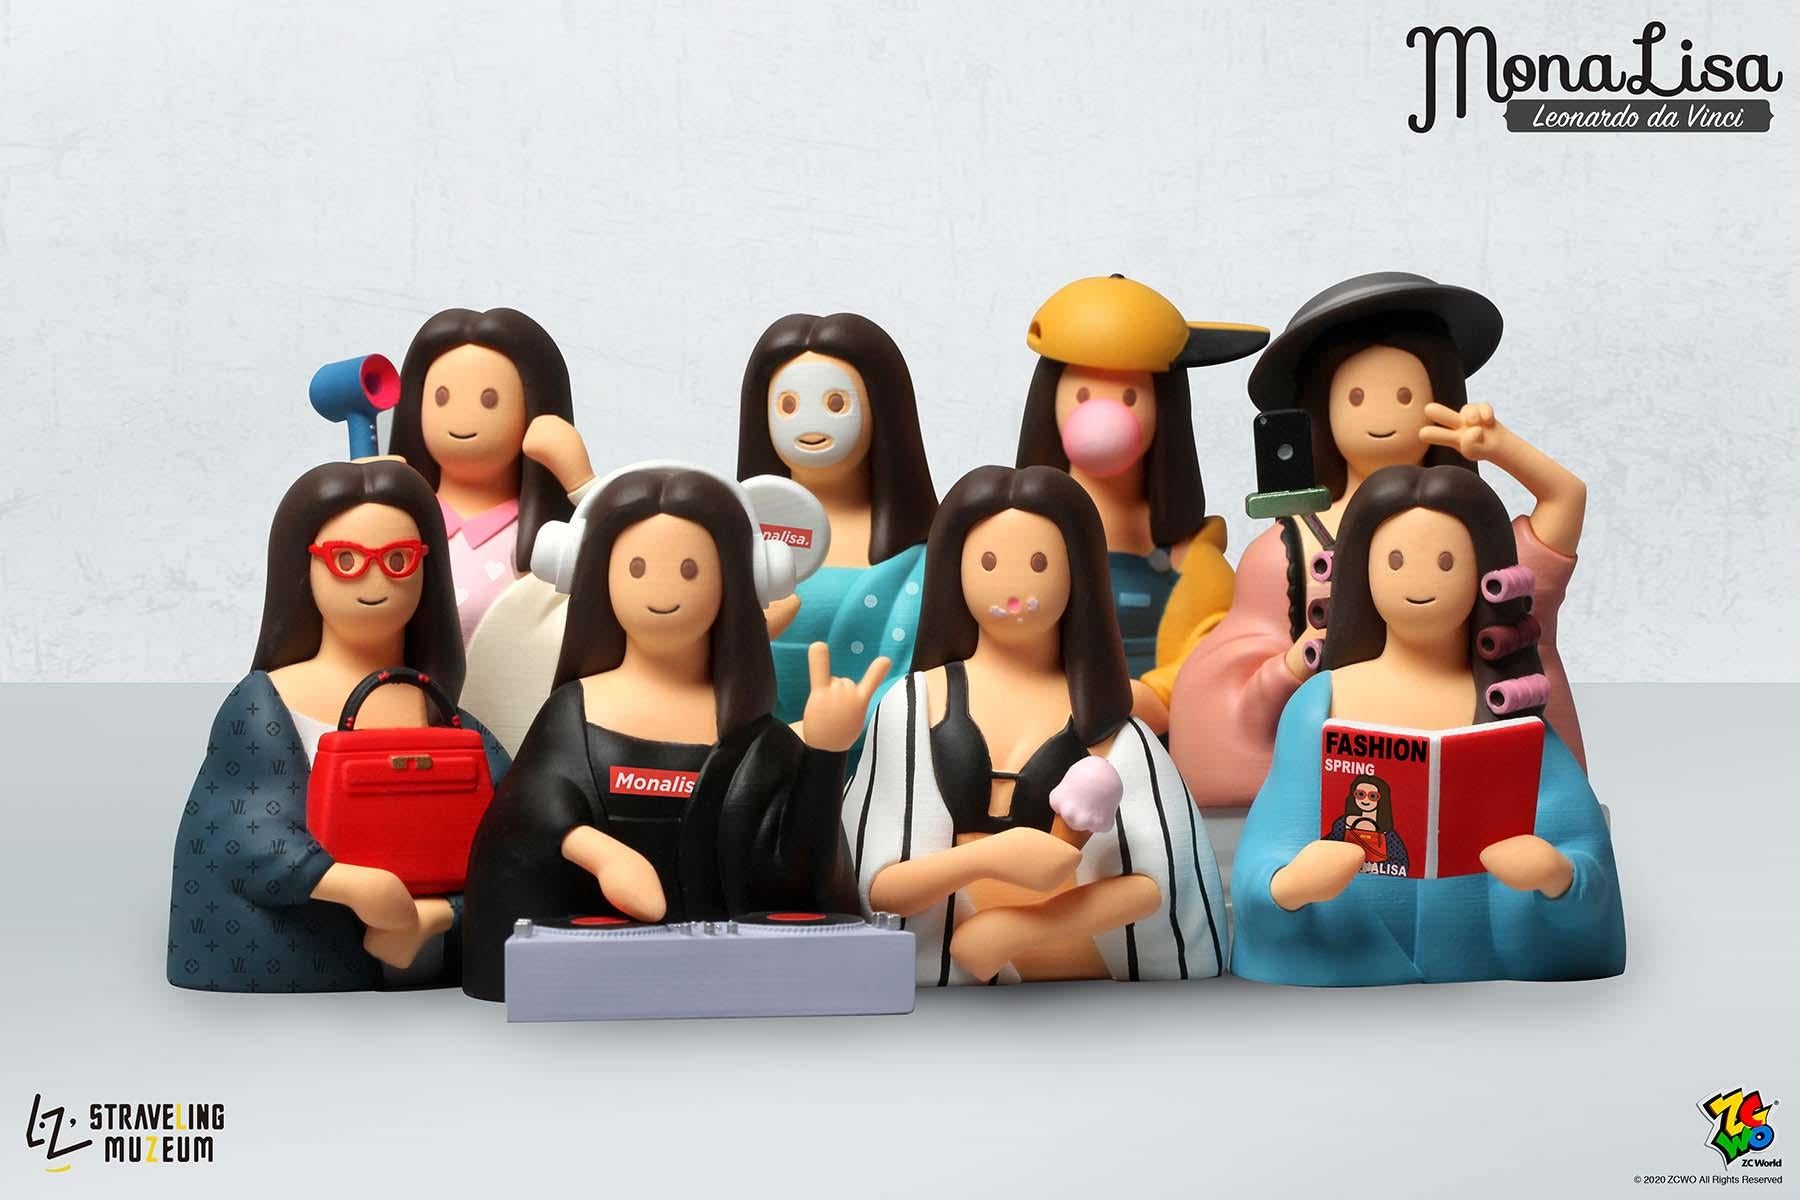 A group of Mona Lisa mini figures capturing funny modern life moments, part of a blindbox series with 8 different styles.